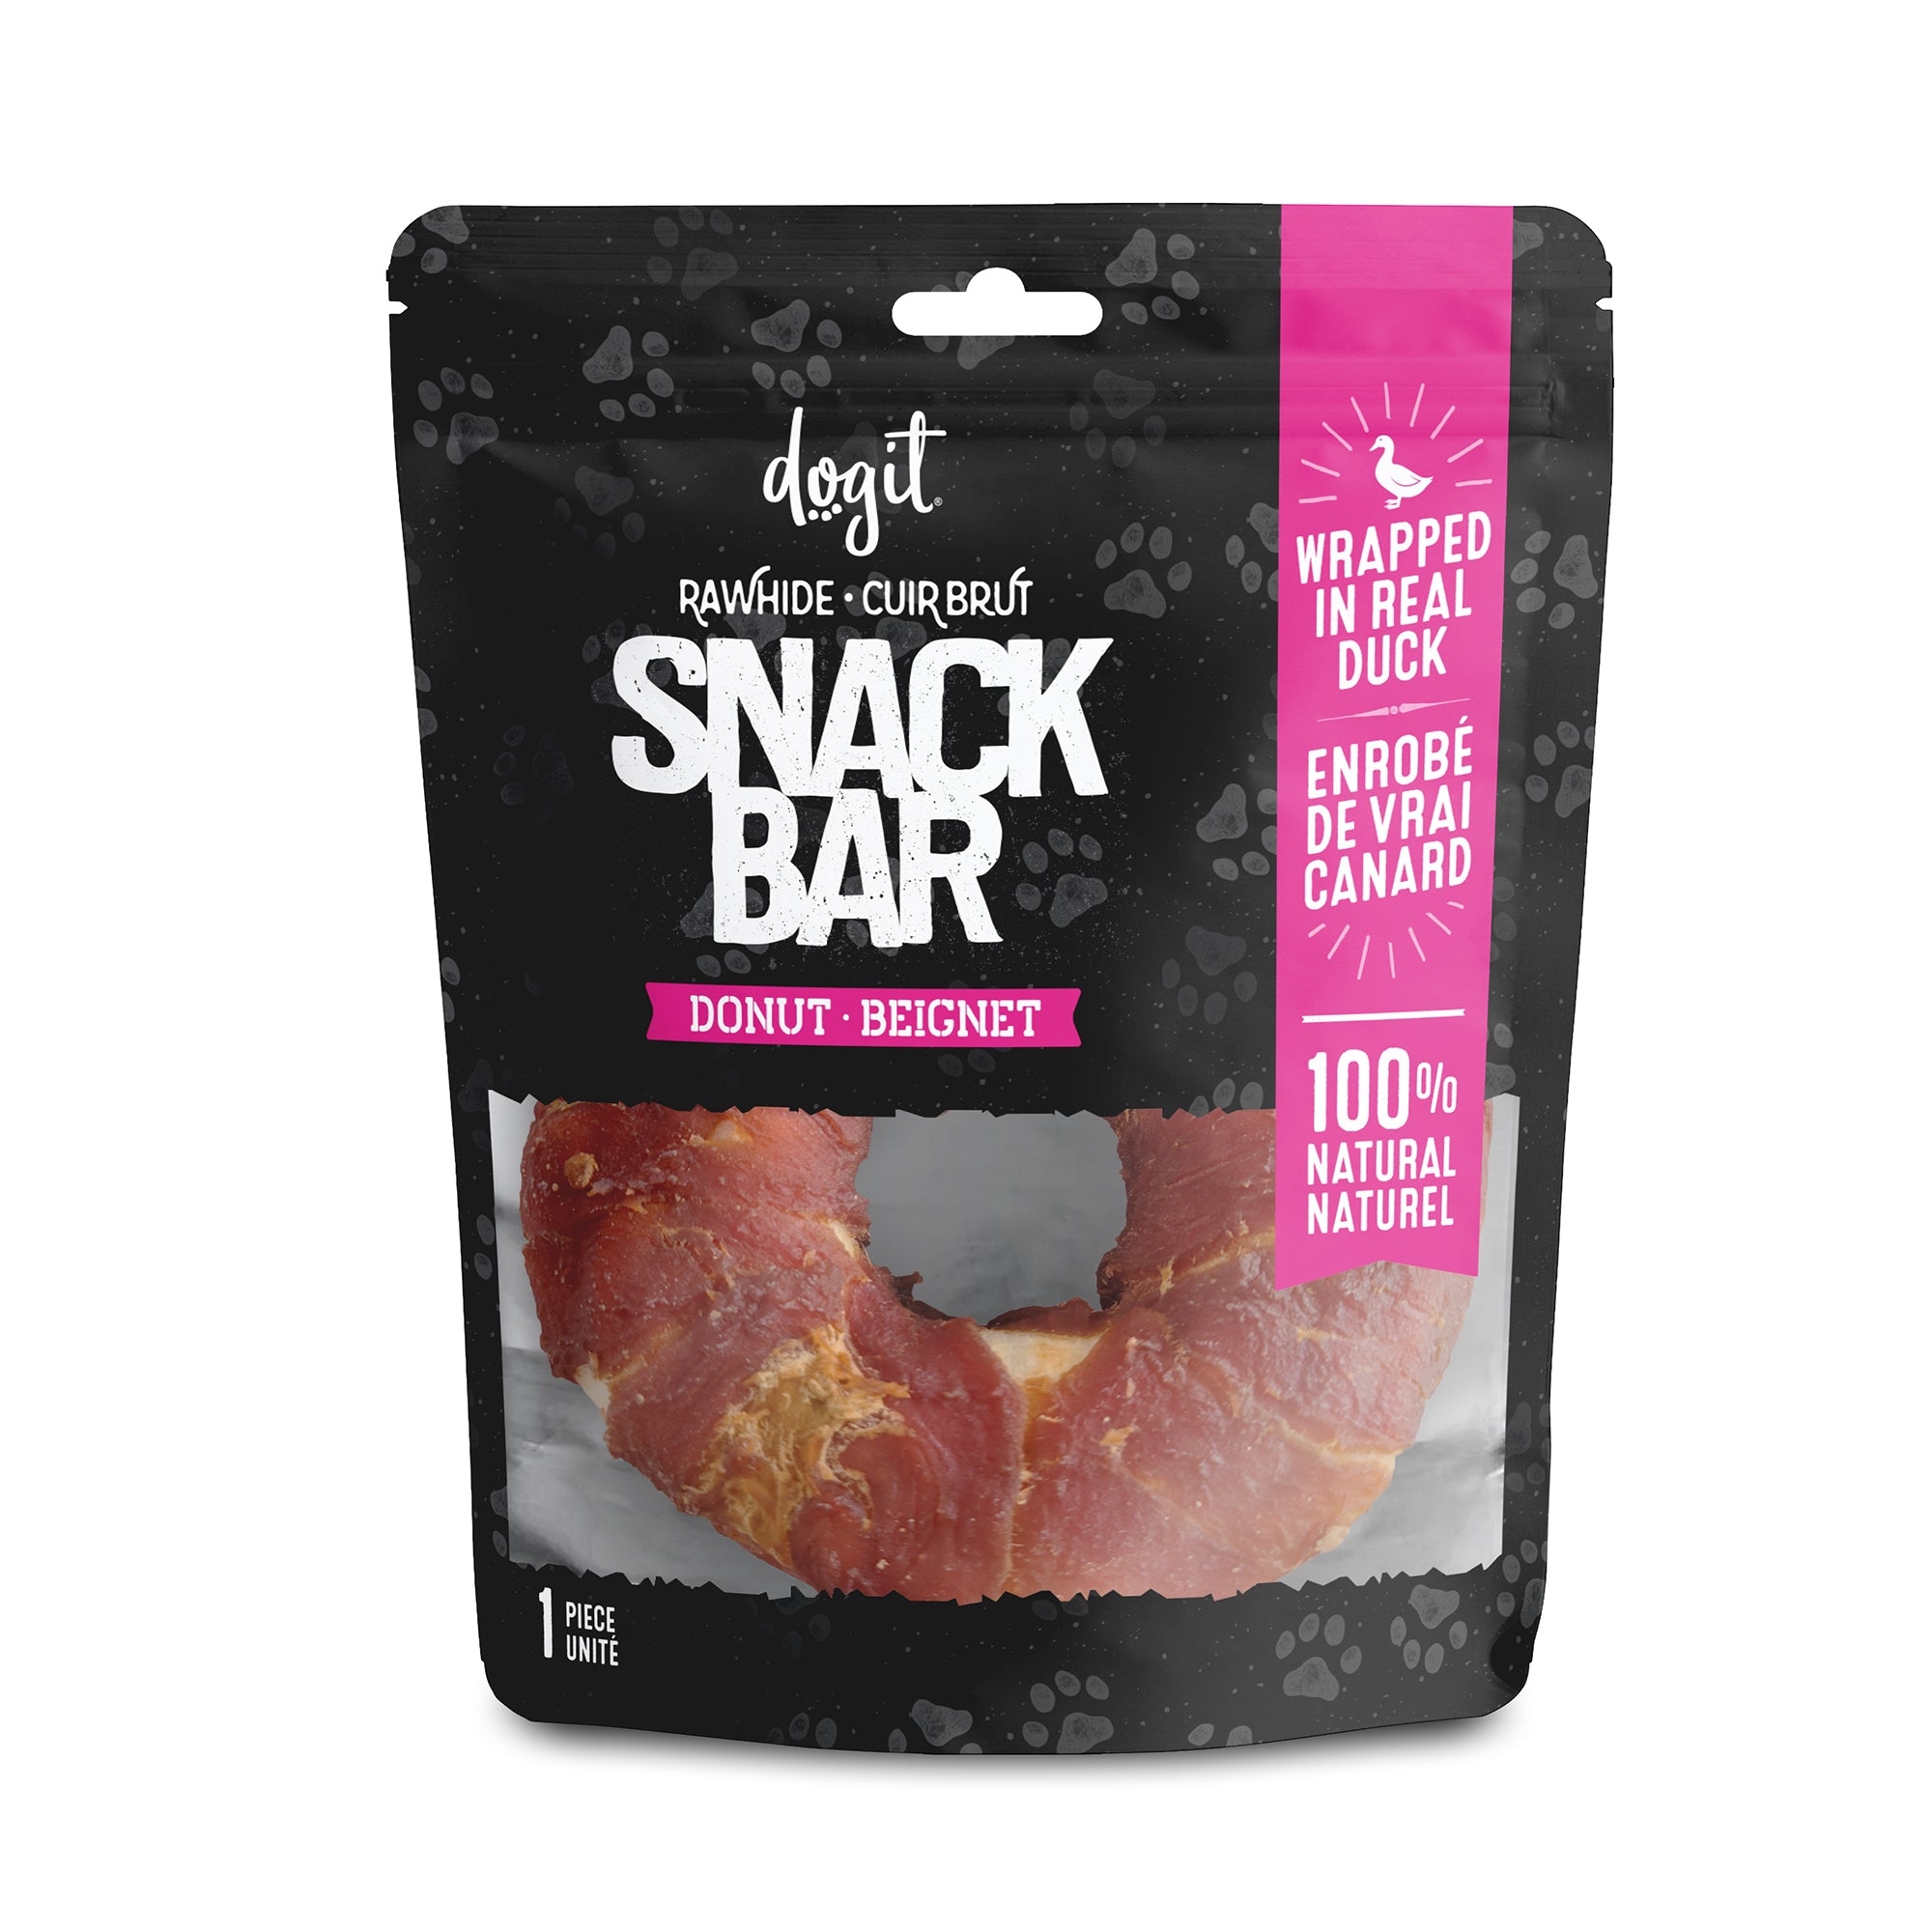 Dogit Snack Bar Rawhide - Duck-Wrapped Donut - 1 pc (10 - 11.4 cm/4 - 4.5 in dia.)